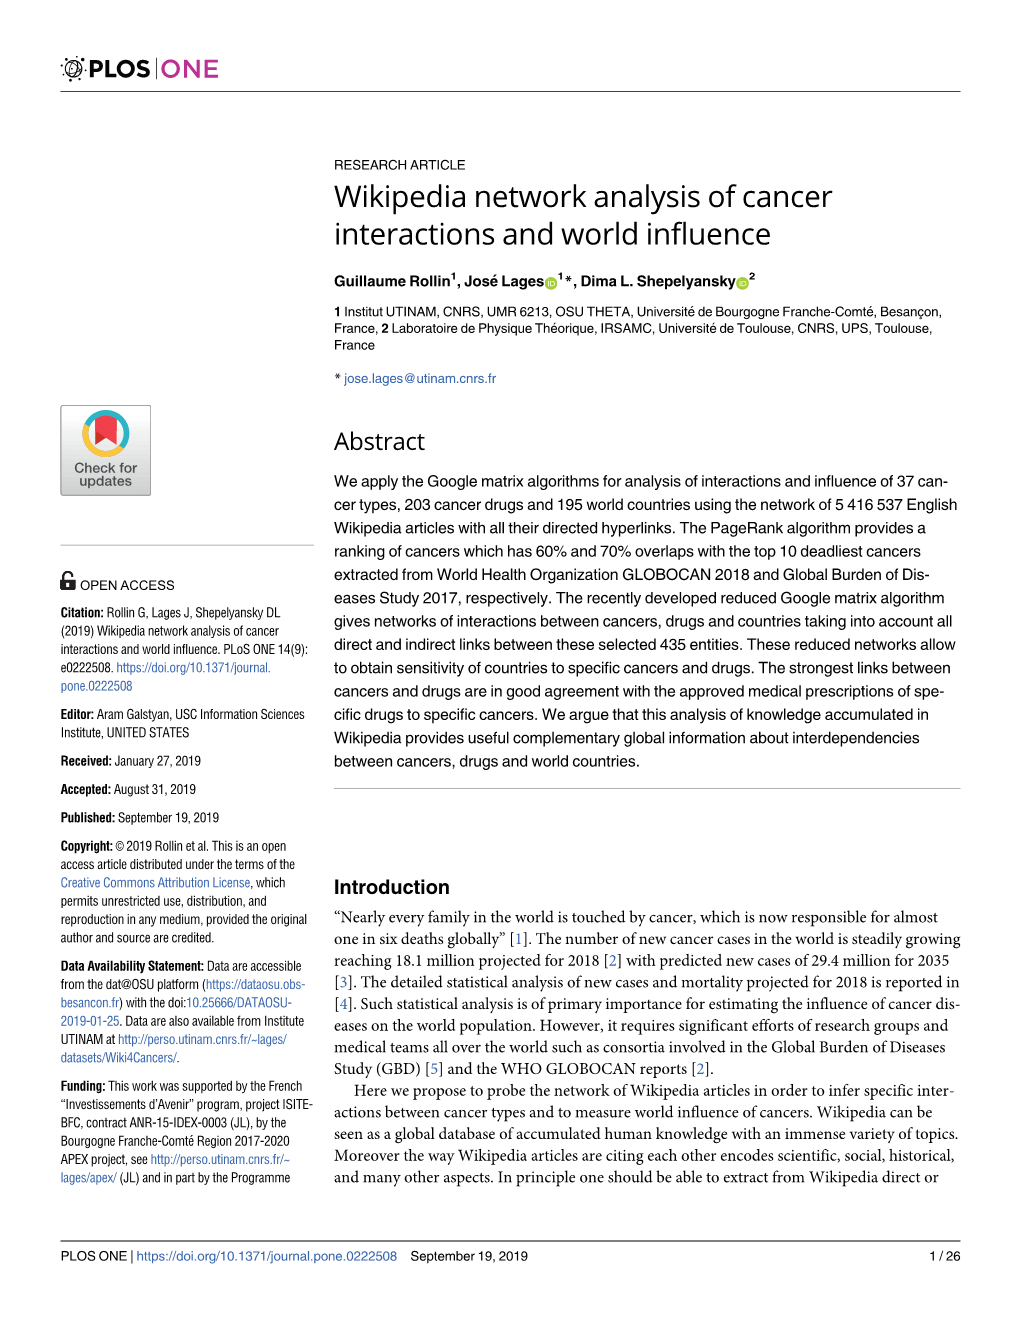 Wikipedia Network Analysis of Cancer Interactions and World Influence